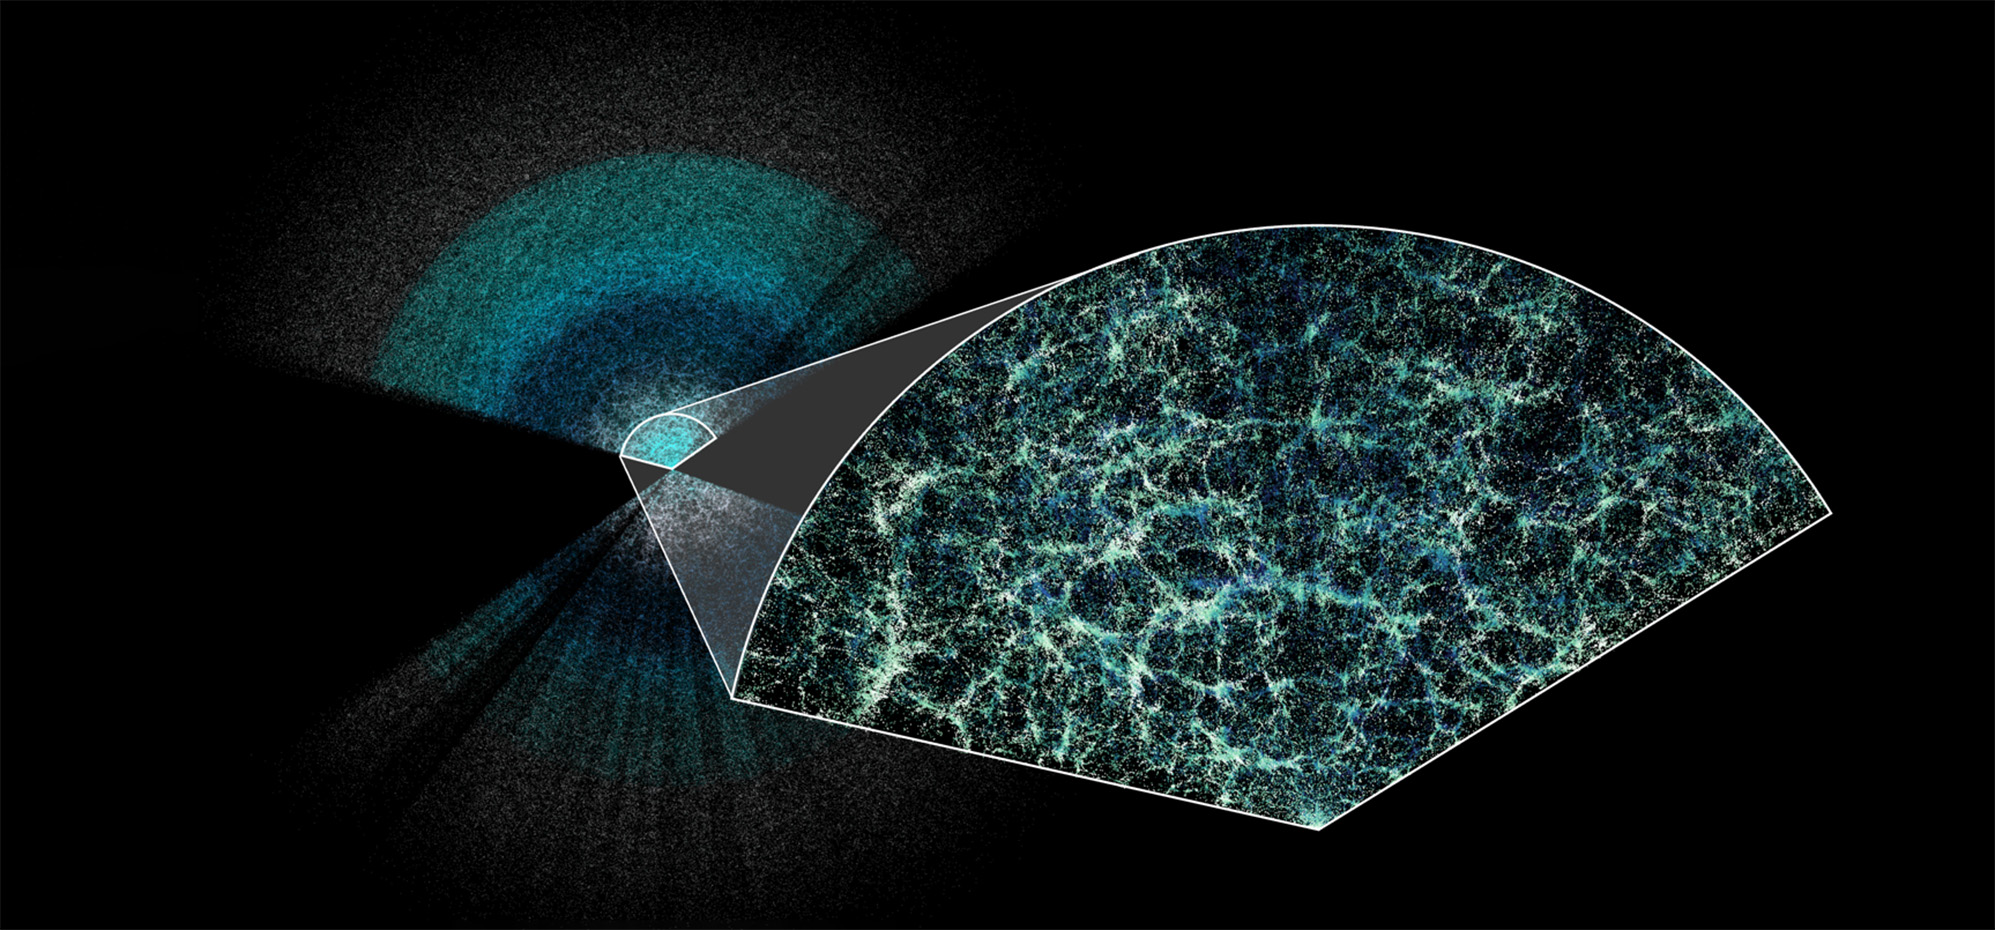 A teal cosmic map of the universe on a black background. Earth is at the center of this thin slice of the full map. There is a magnified section showing the underlying structure of matter in our universe.